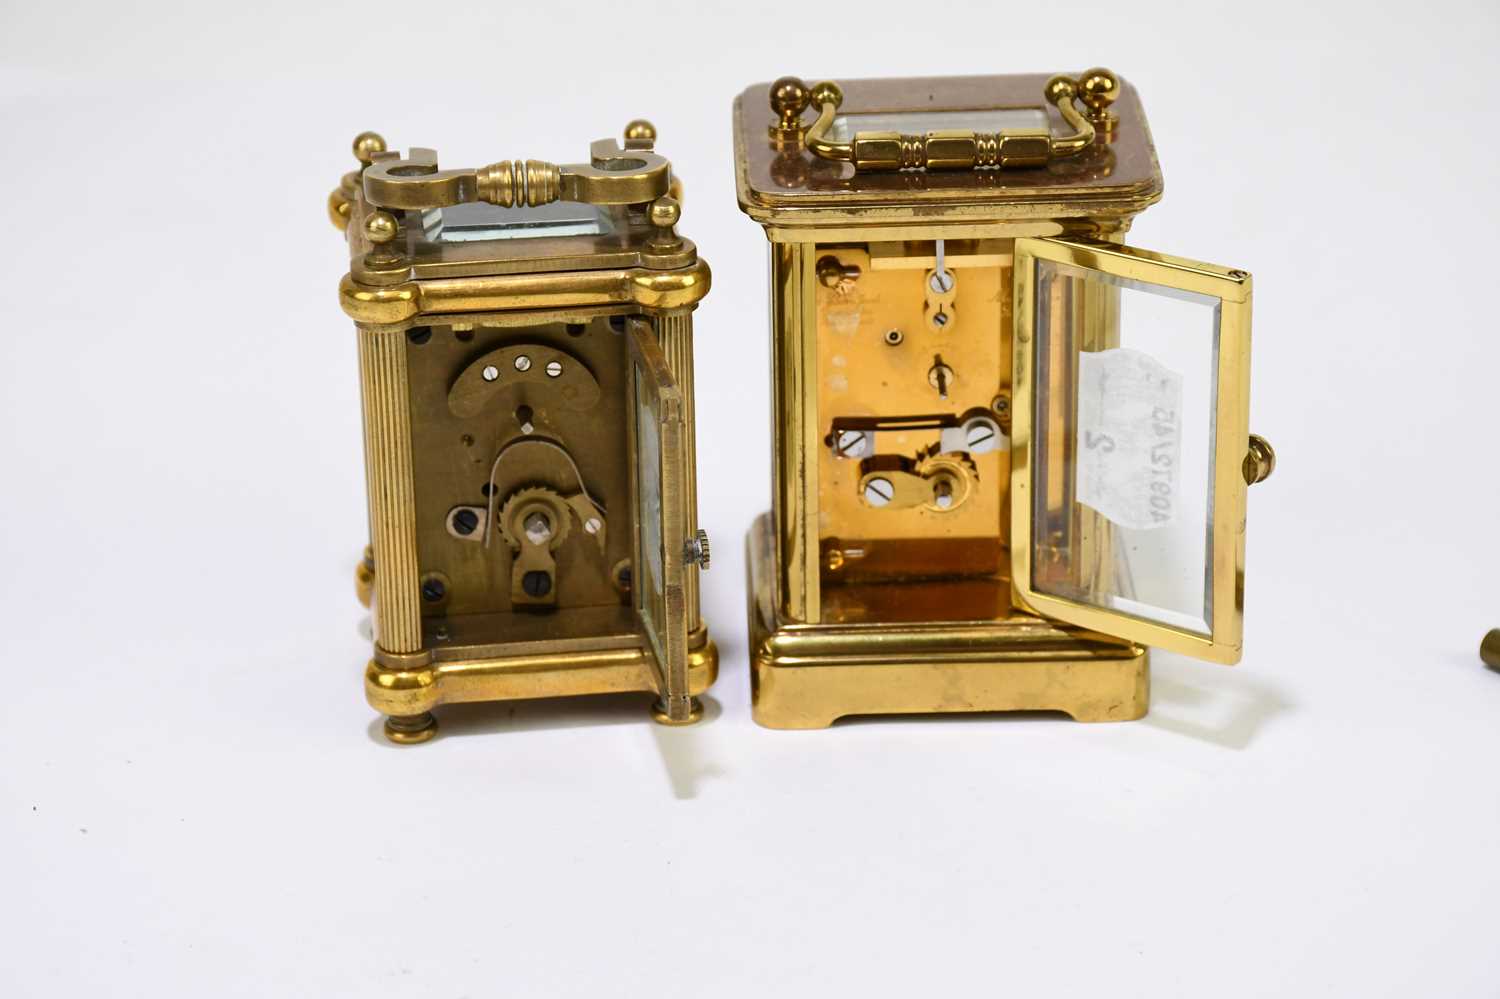 MATTHEW NORMAN; a brass cased carriage clock, the enamel dial set with Roman numerals, height 8cm, - Image 3 of 5